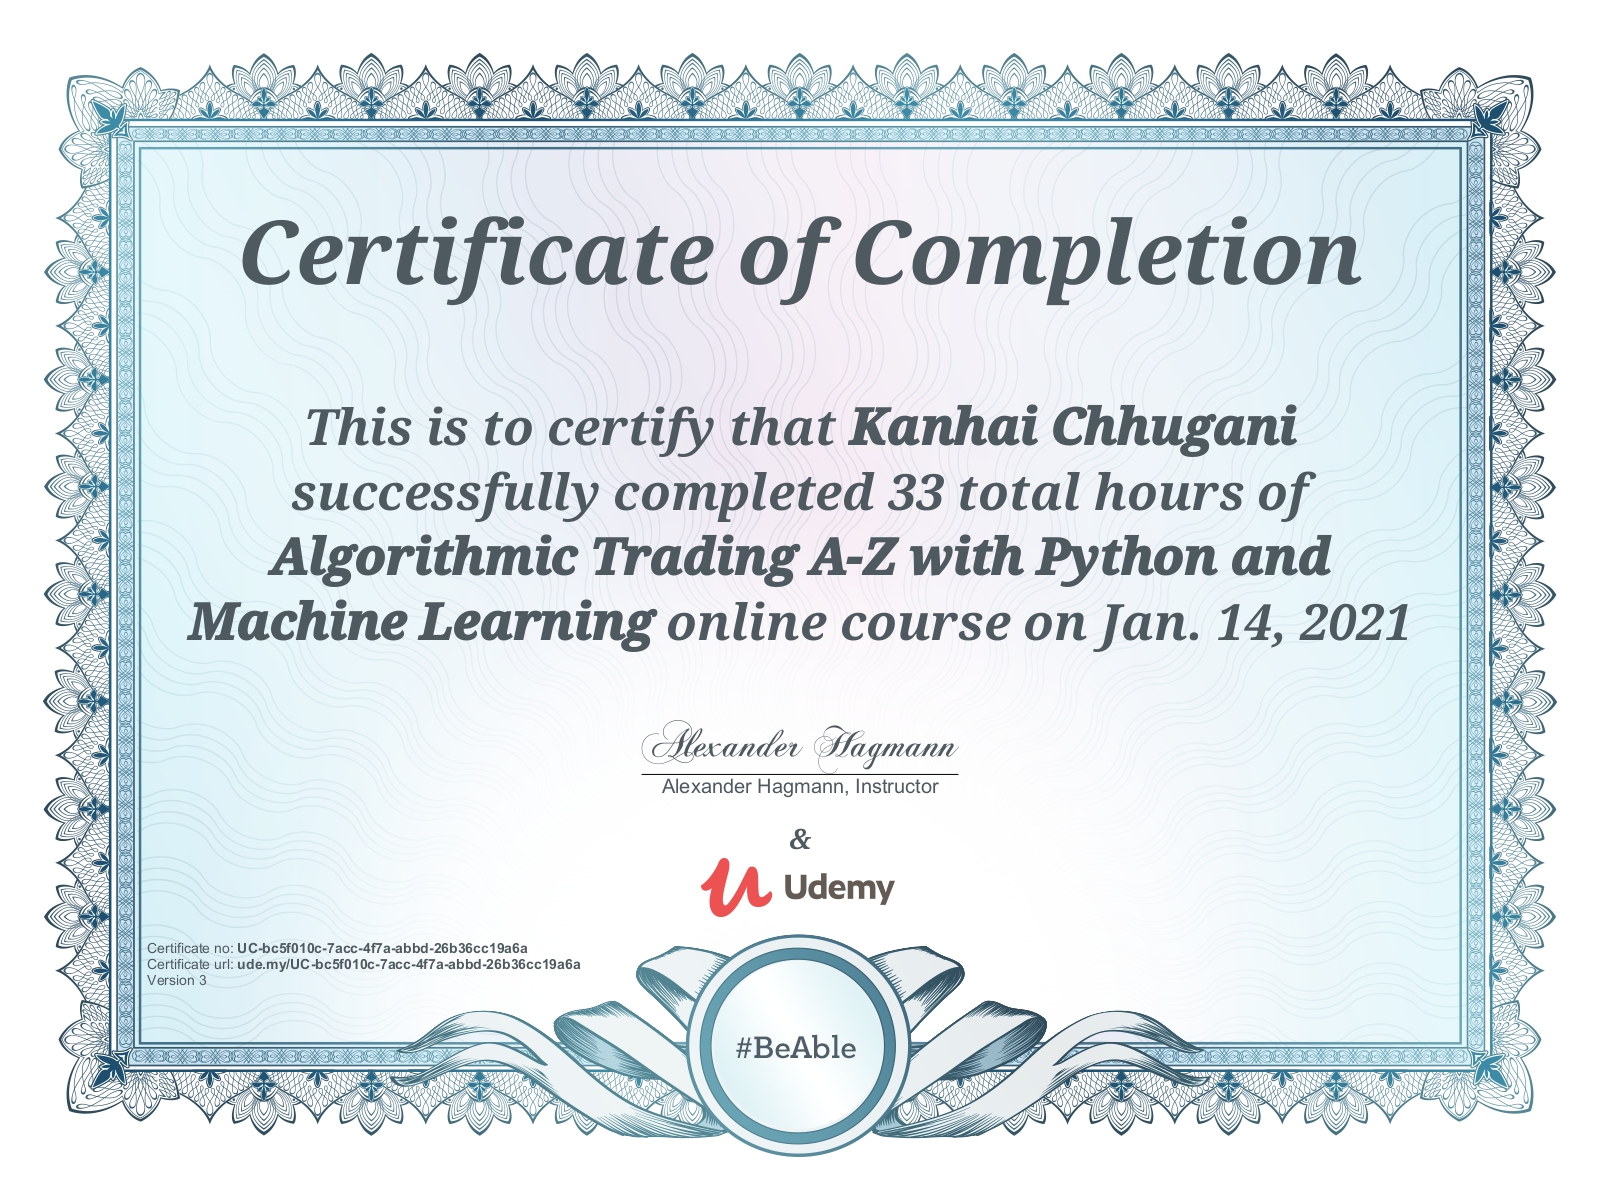 Udemy Certificate for Algorithmic Trading A-Z with Python, Machine Learning & AWS